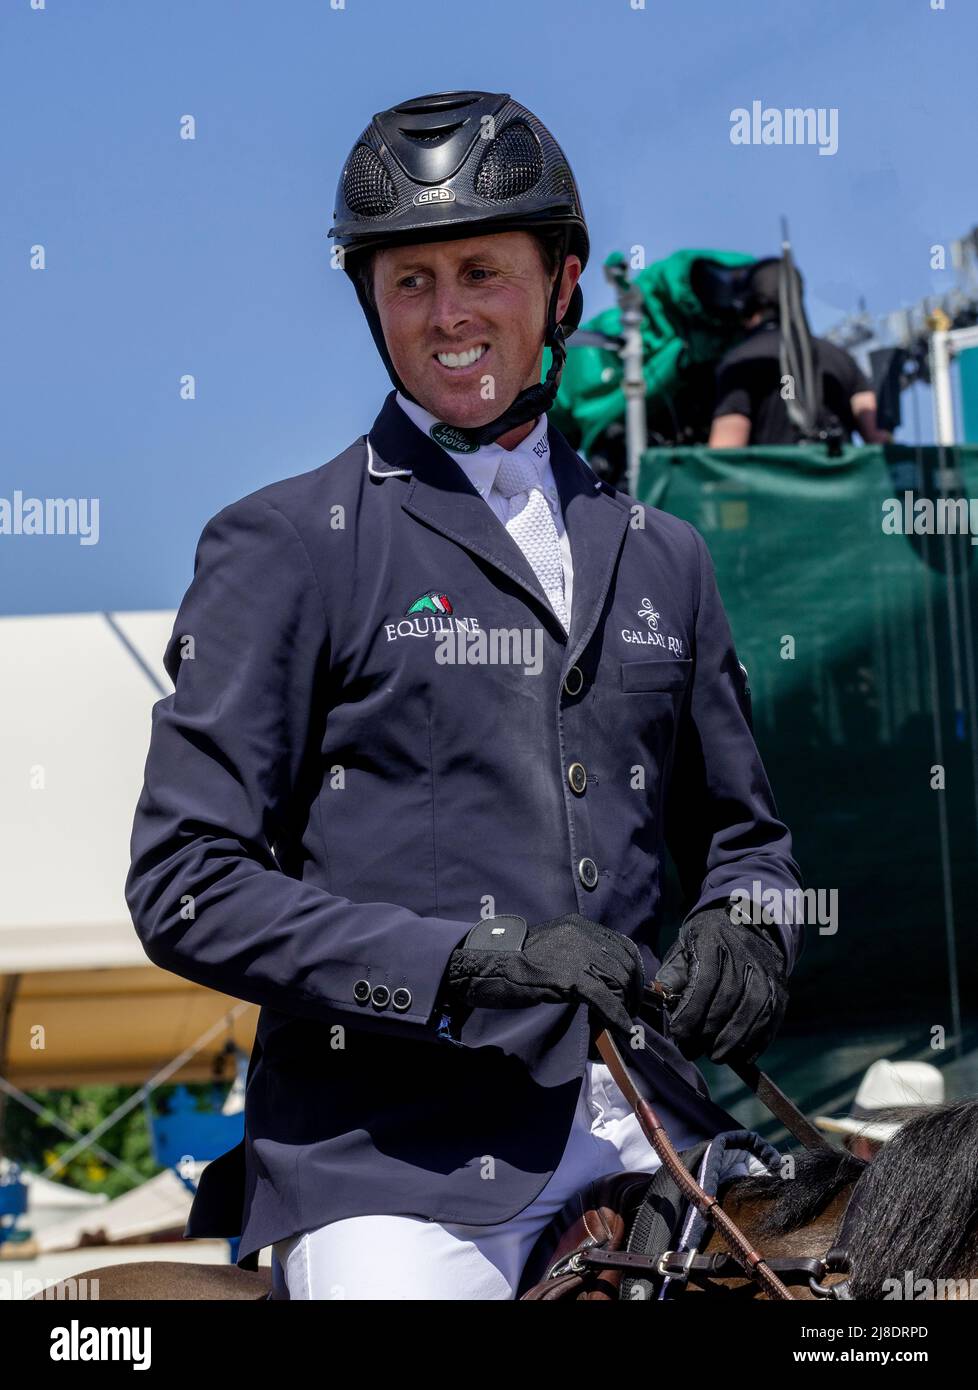 Windsor Berkshire UK 14 May 2022 Ben Maher, British Olympian  show jumper, in the warm-up ring before the Rolex Grand Prix CS15 jumping in the Carle Area at the Royal Windsor Horse Show   Credit. Gary Blake/ Alamy Live News Stock Photo